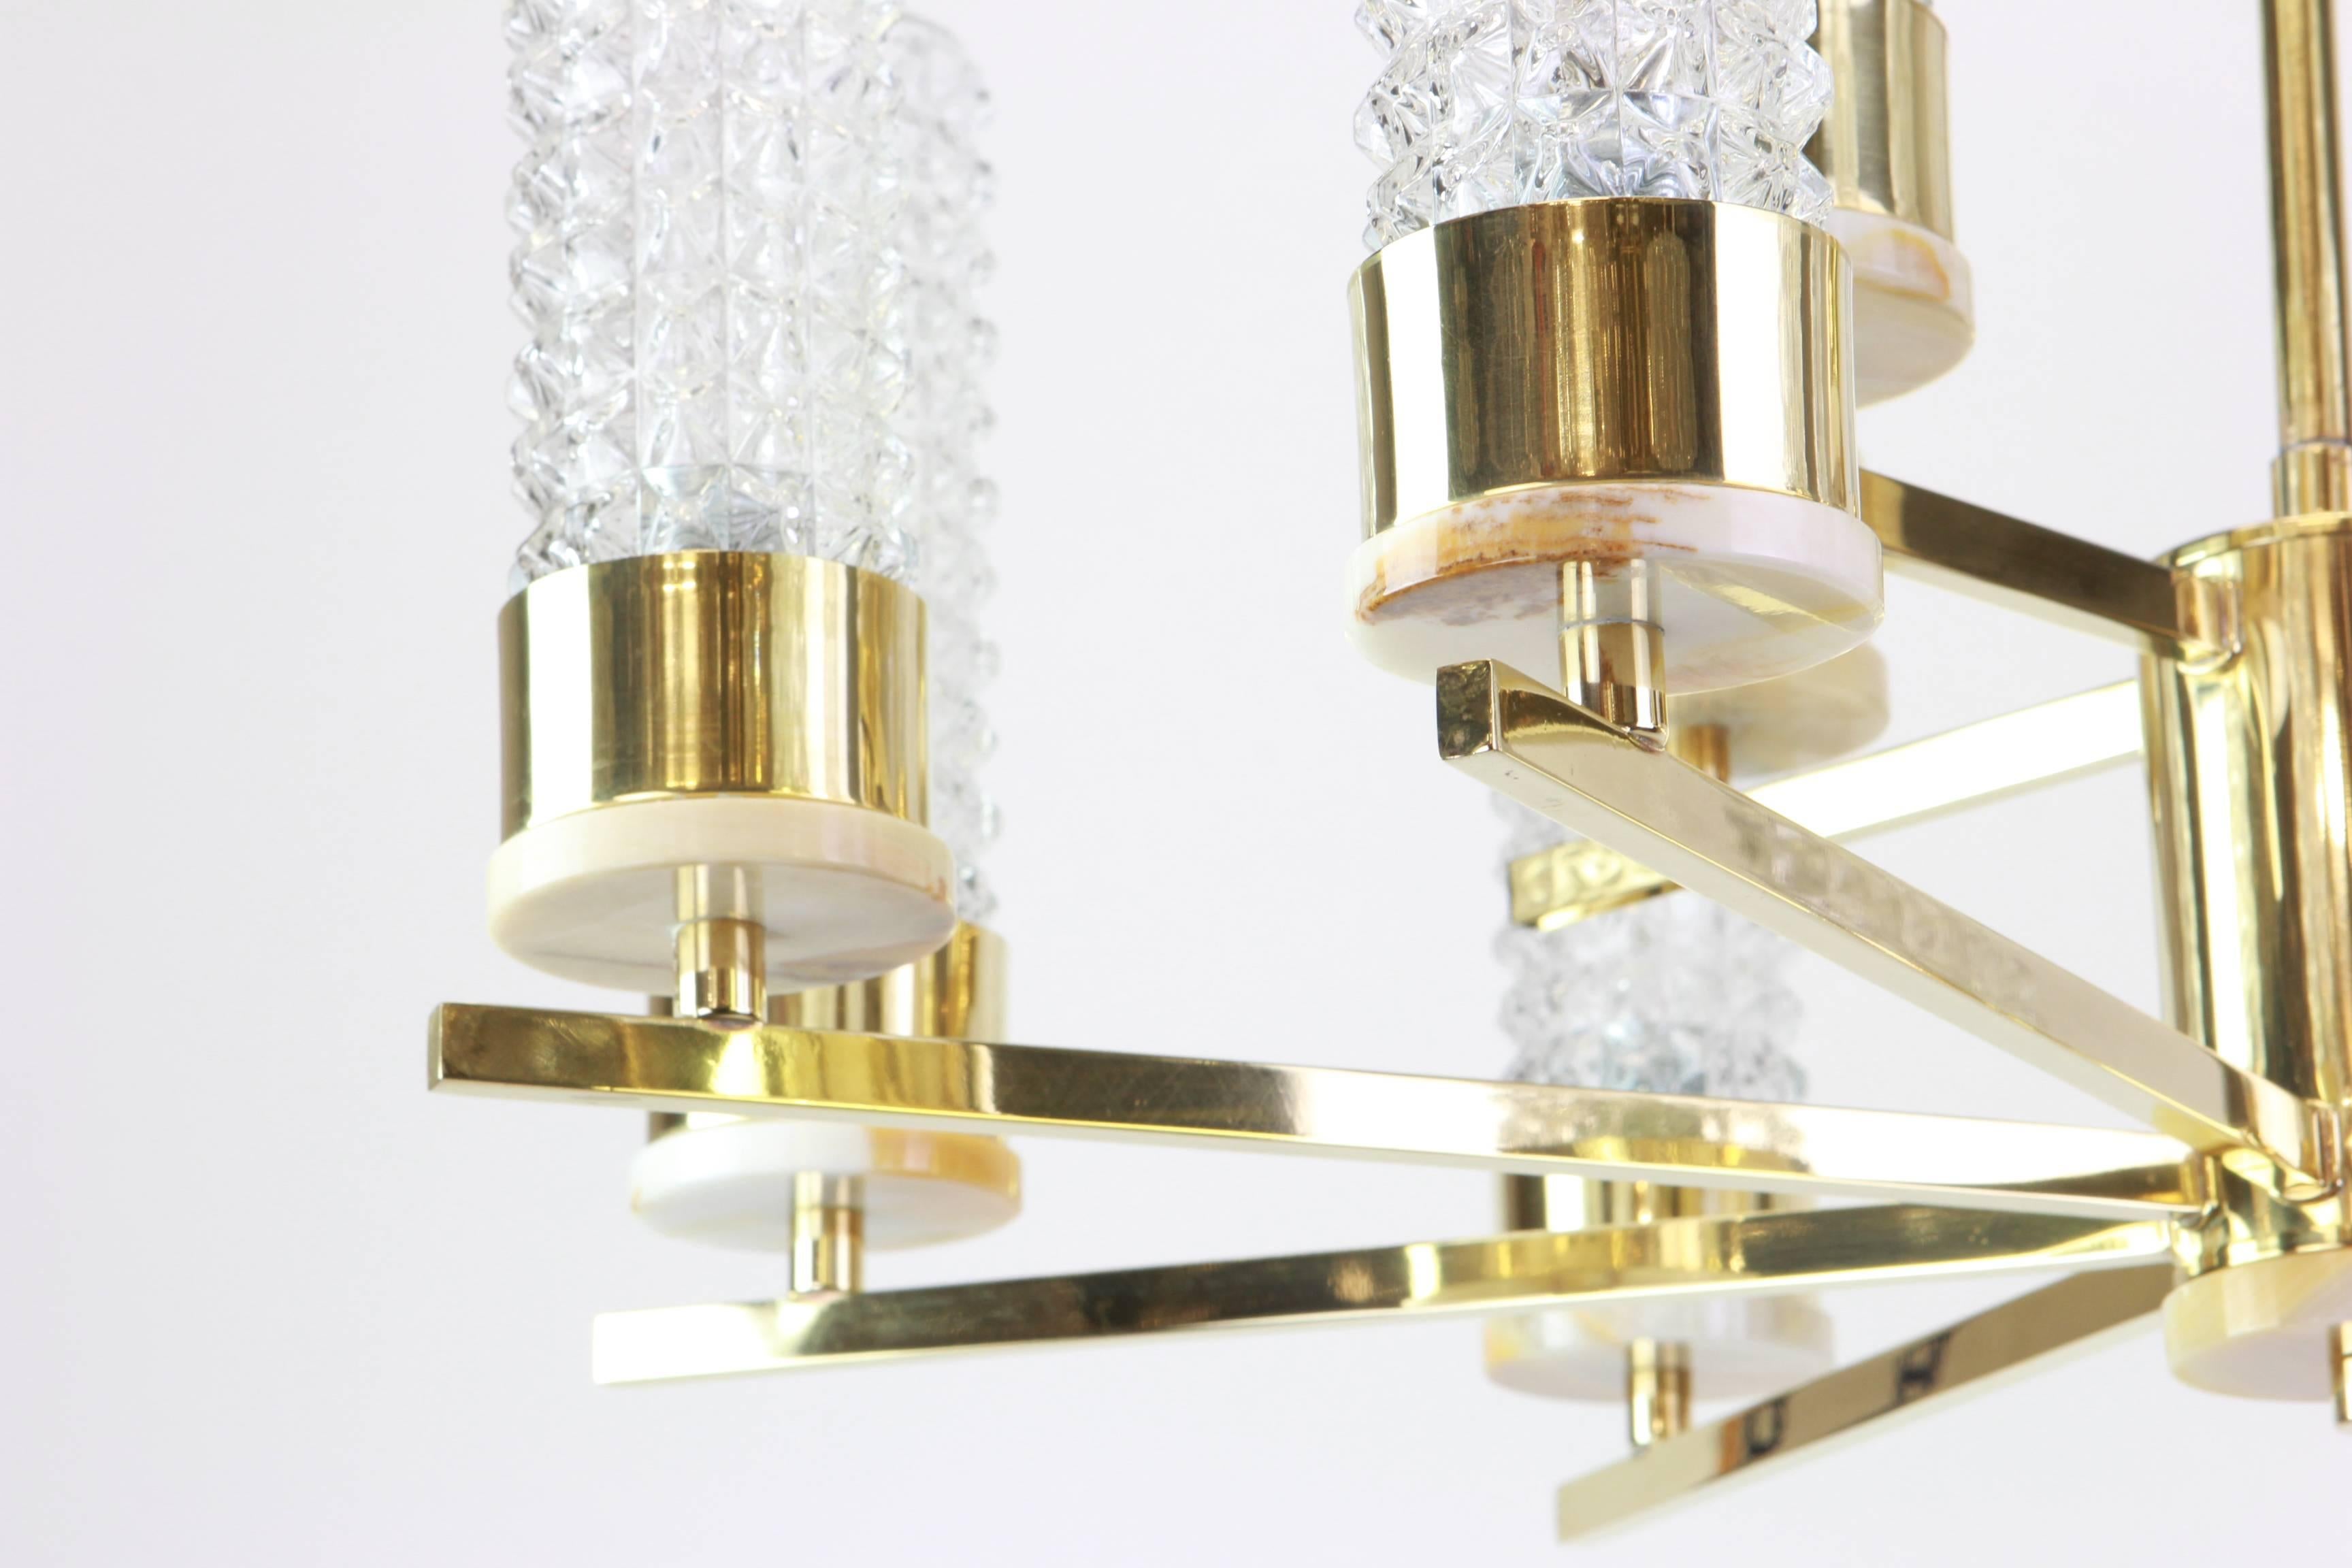 Twelve-light brass chandelier in the style of Hans-Agne Jakobsson.
Made with brass - best of the 1960s.

High quality and in very good condition. Cleaned, well-wired and ready to use. 

The fixture requires 12 x E14 Standard bulbs with 40W max each